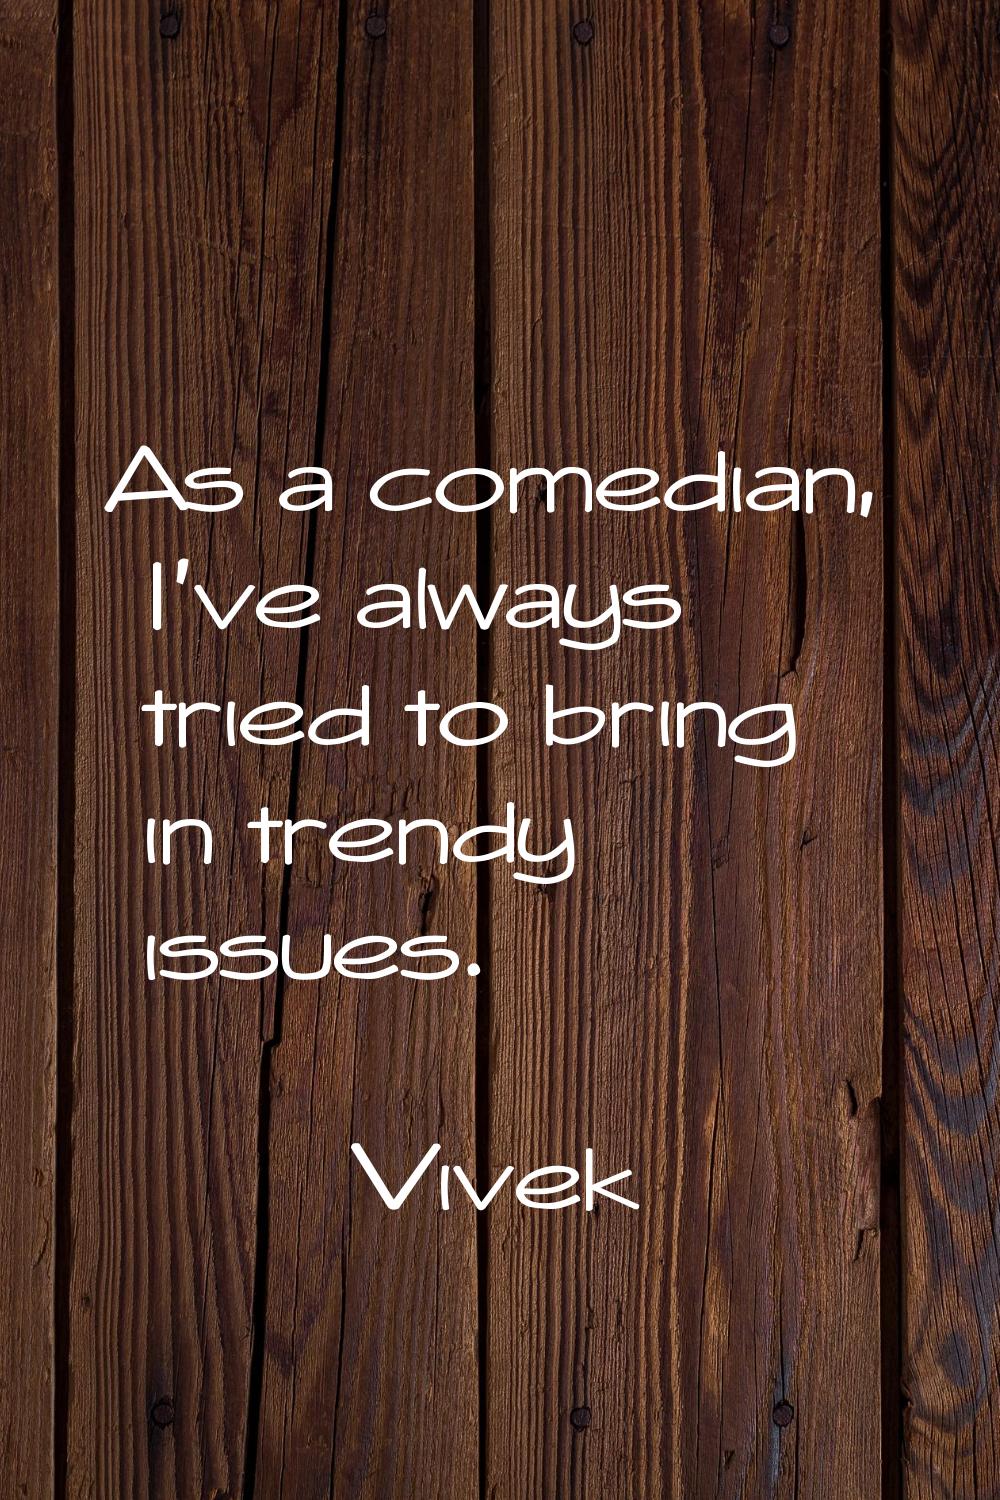 As a comedian, I've always tried to bring in trendy issues.